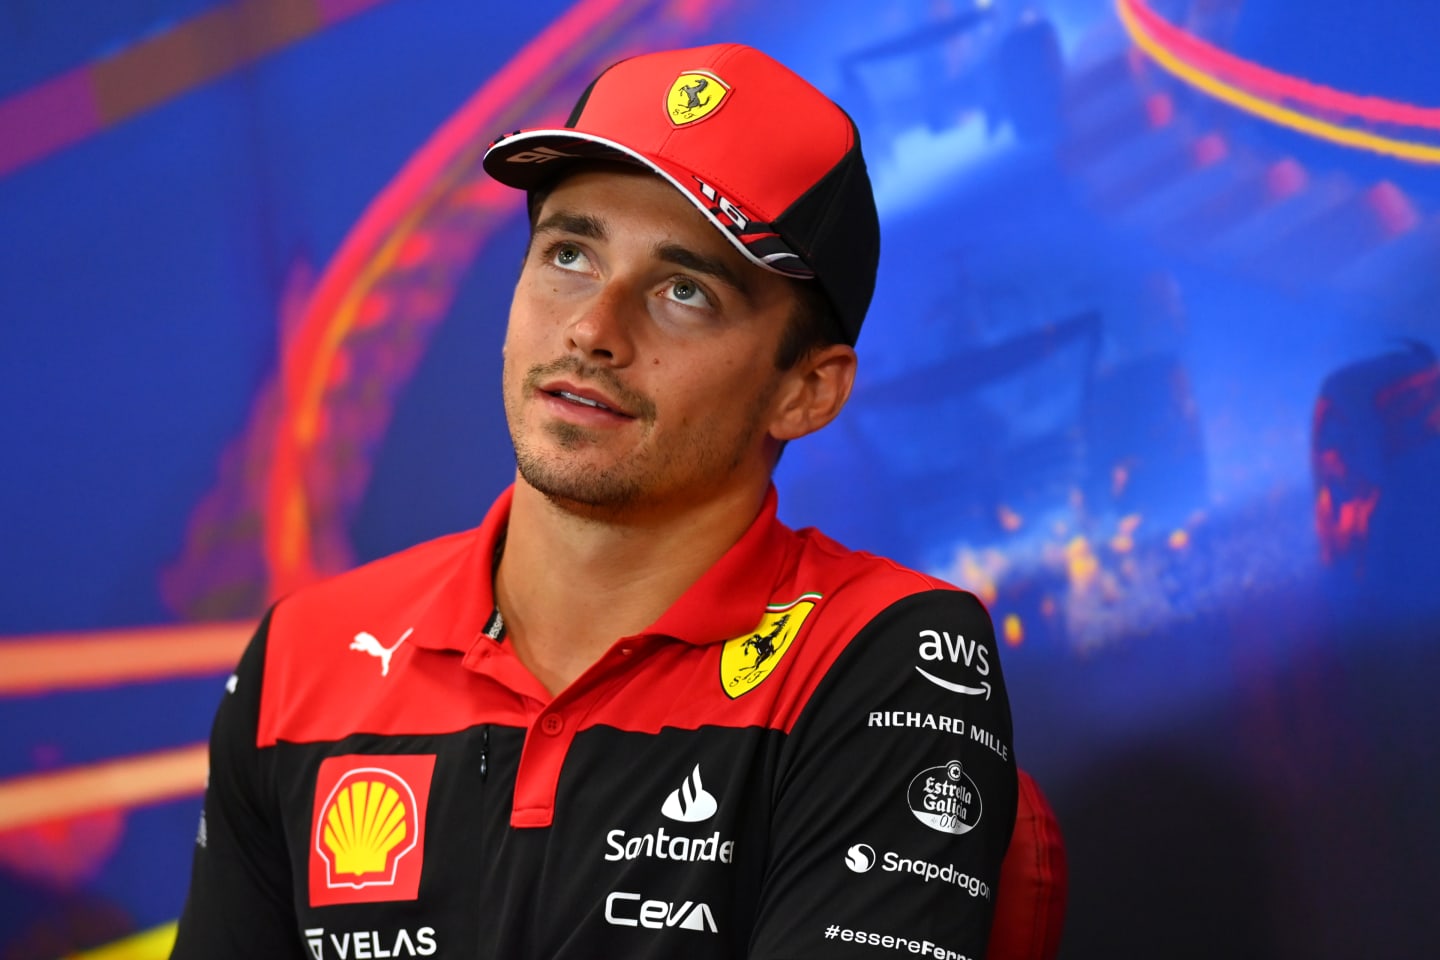 SPA, BELGIUM - AUGUST 25: Charles Leclerc of Monaco and Ferrari attends the Drivers Press Conference during previews ahead of the F1 Grand Prix of Belgium at Circuit de Spa-Francorchamps on August 25, 2022 in Spa, Belgium. (Photo by Dan Mullan/Getty Images)